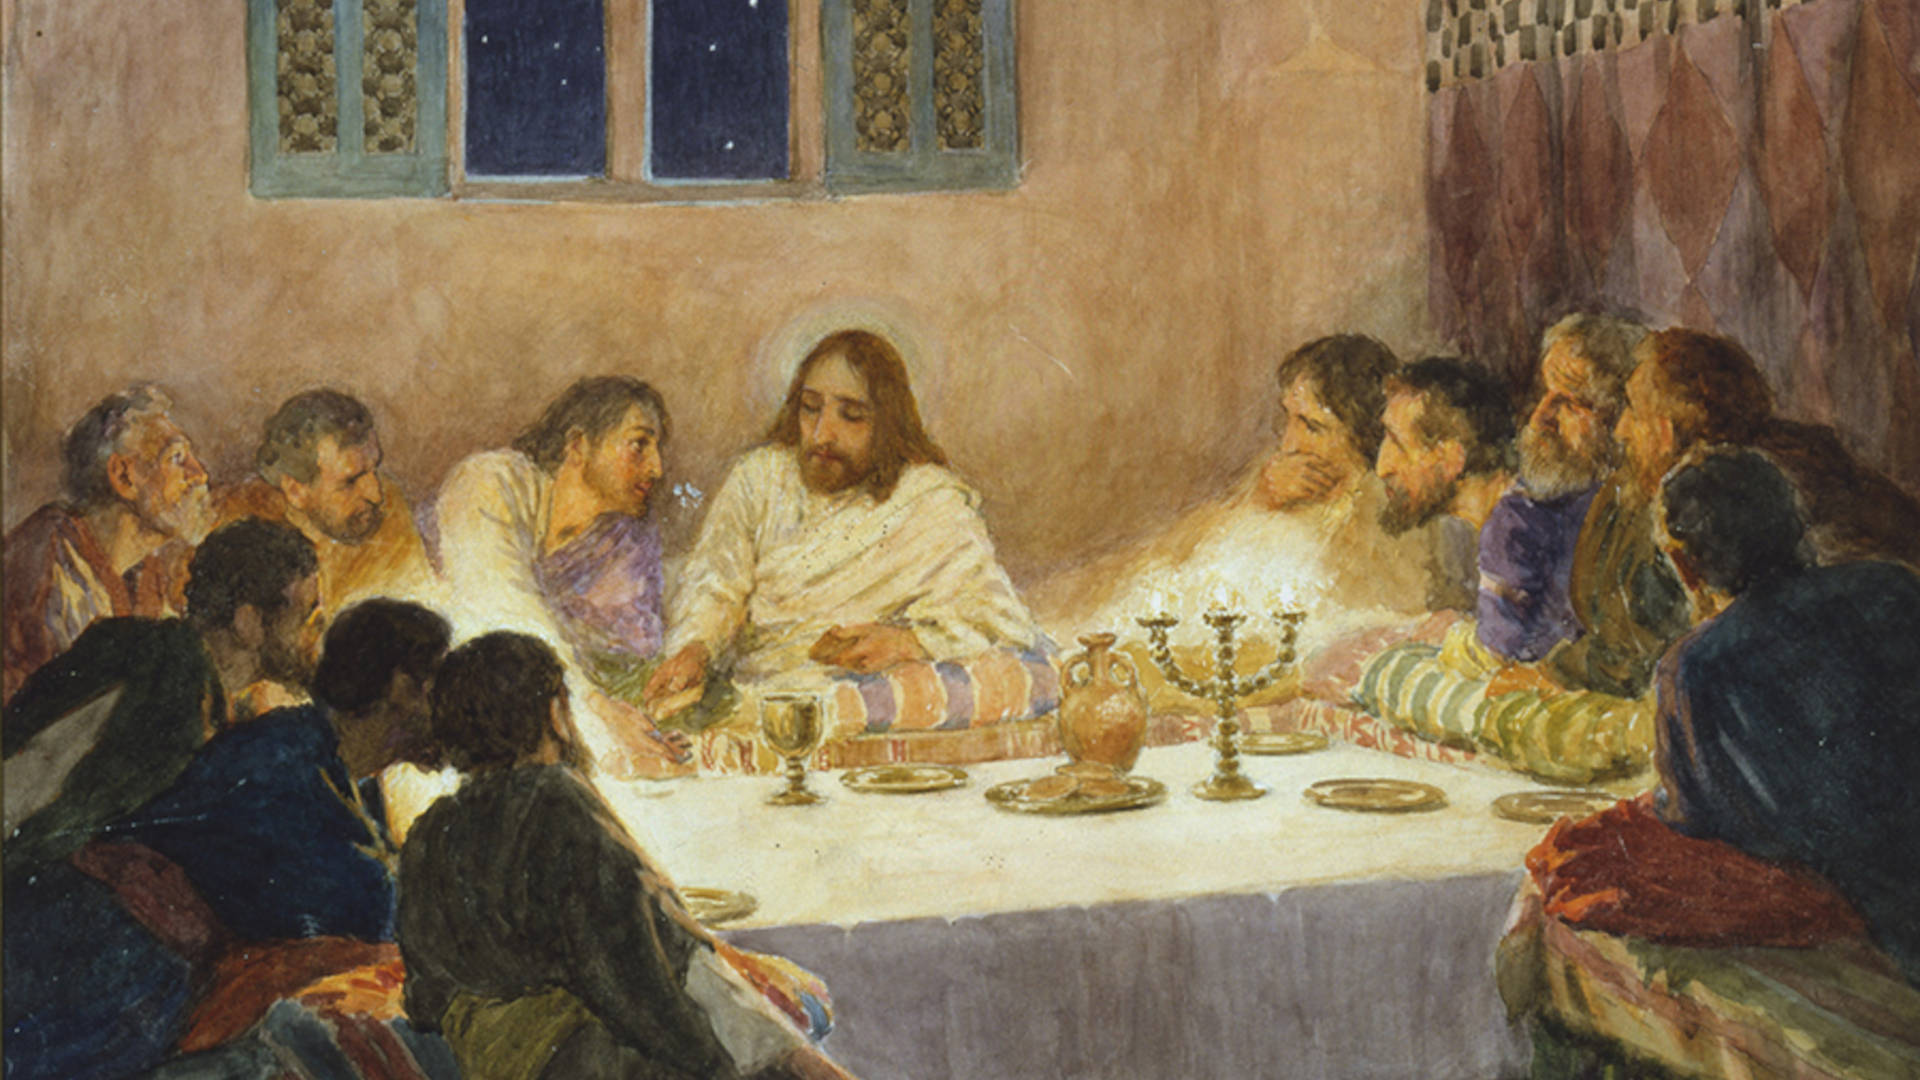 William Henry Margetson's painting, "The Last Supper," depicting Jesus and his apostles at the last supper